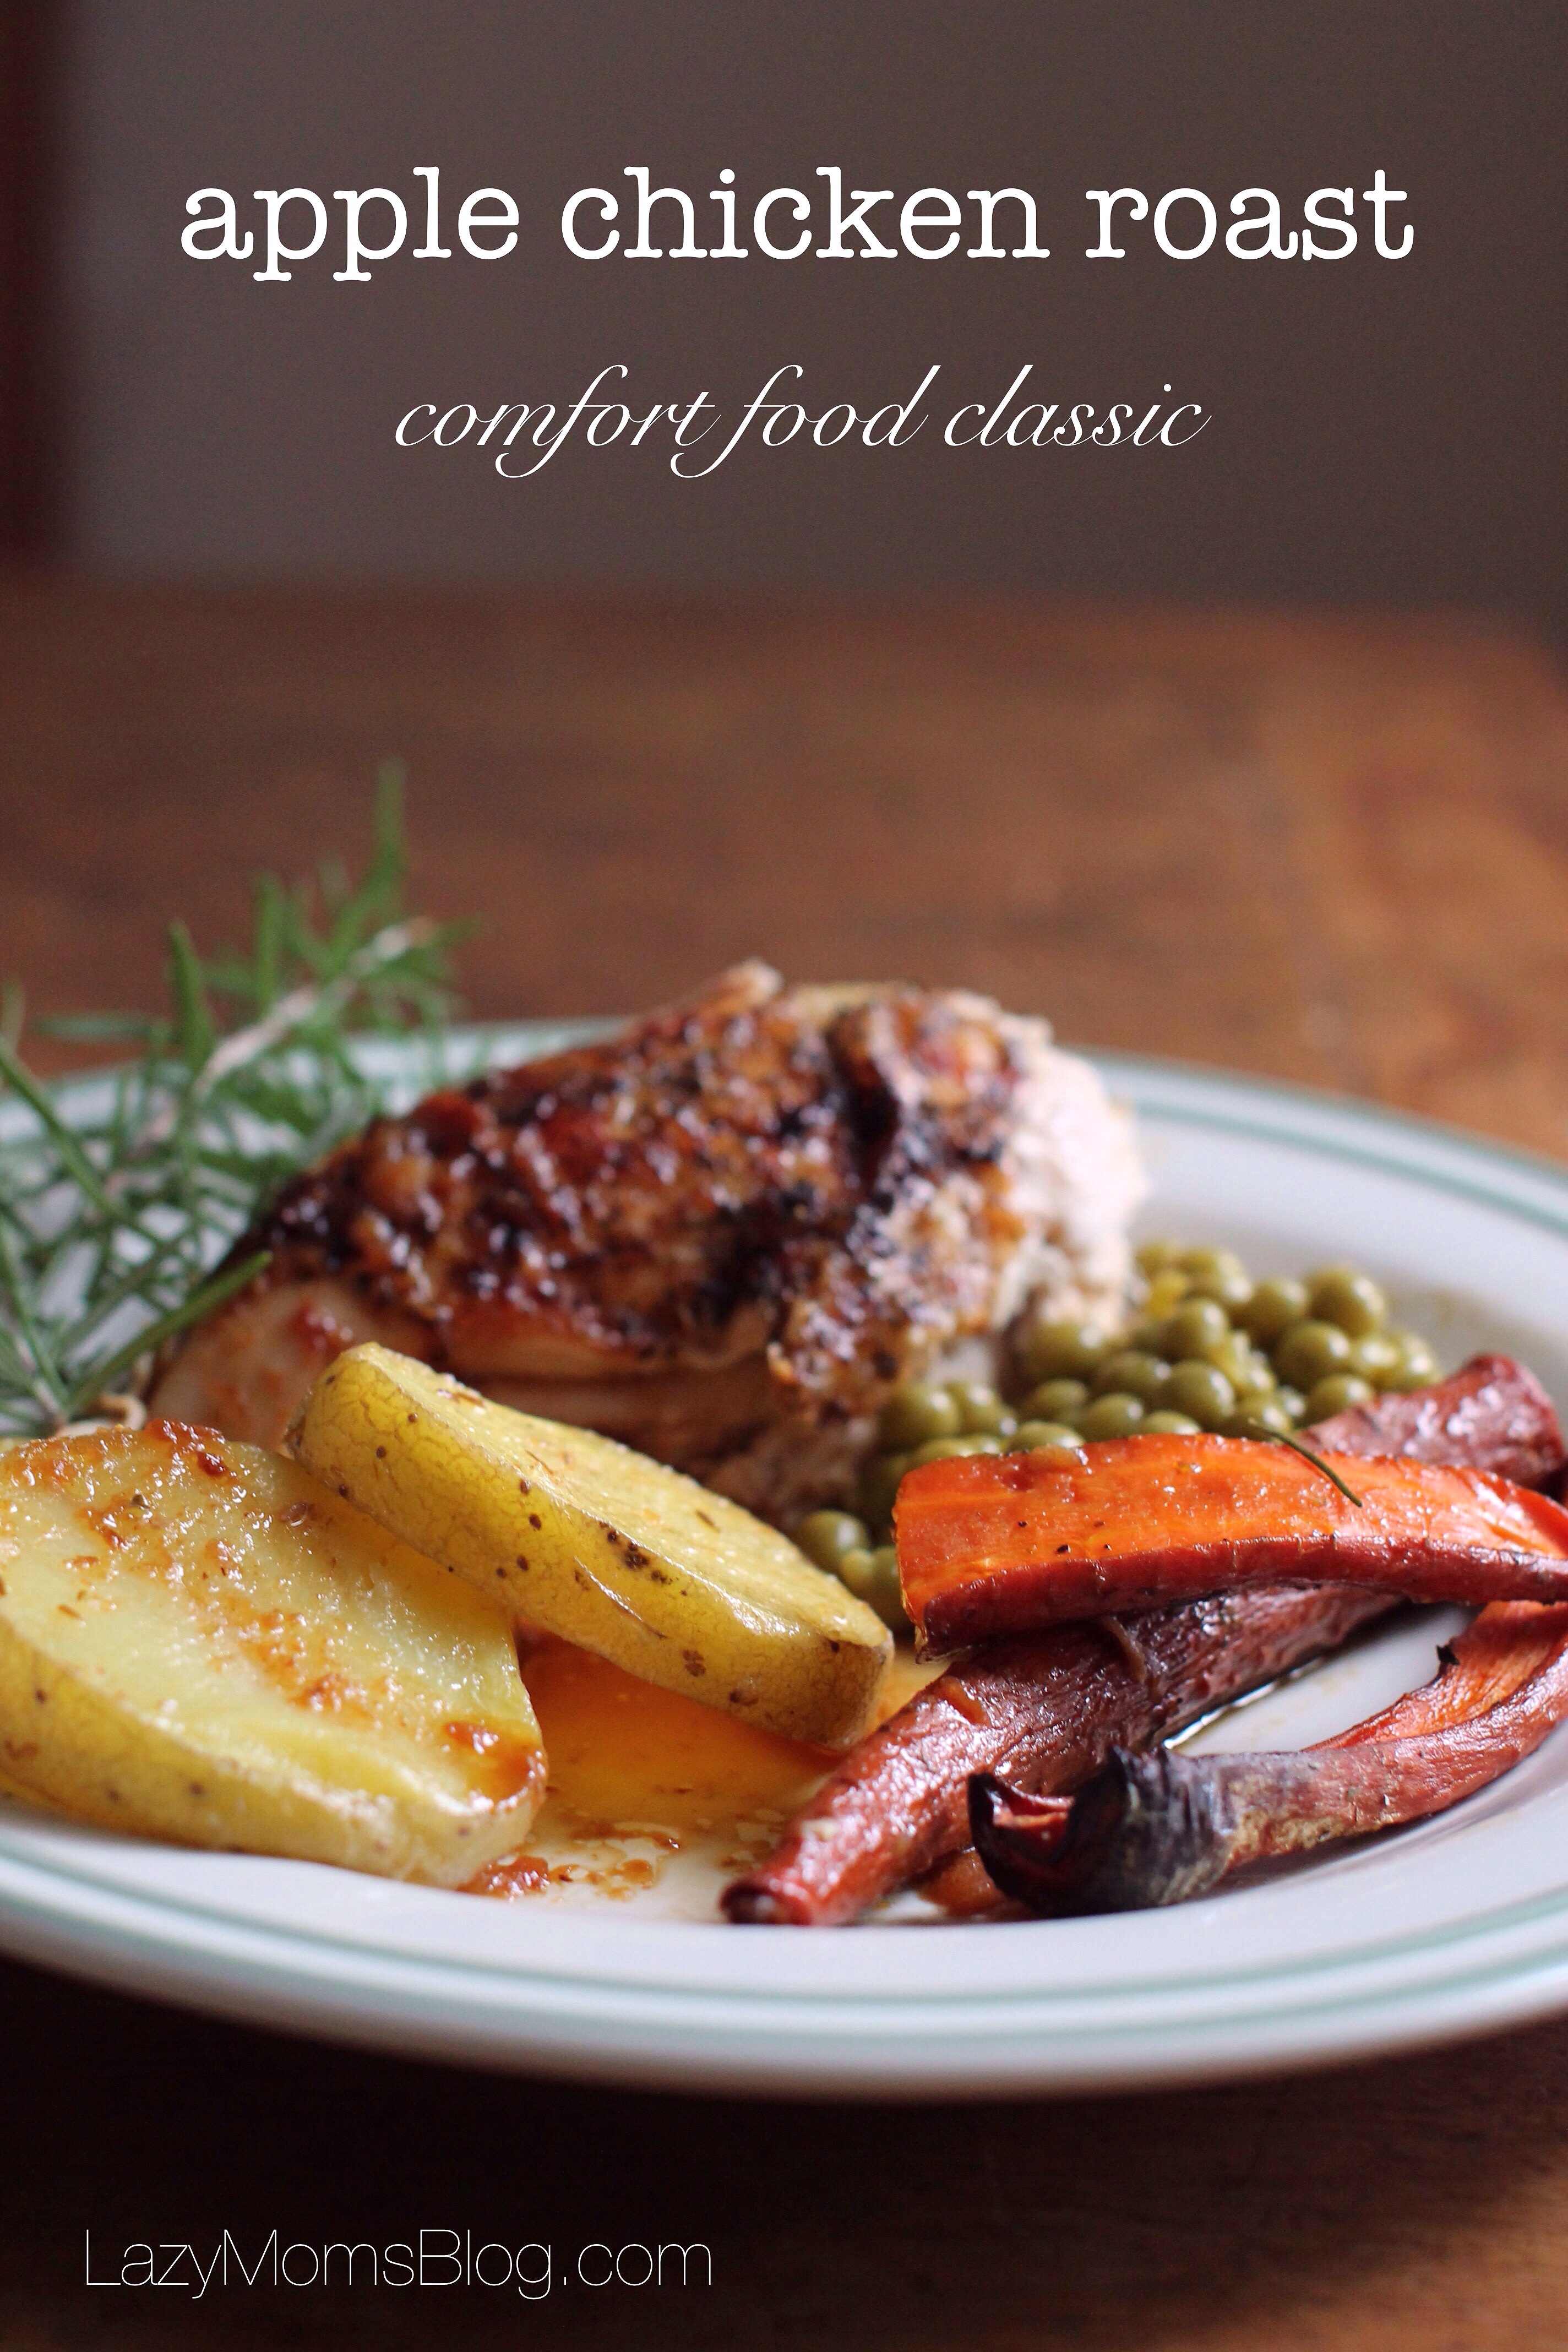 This apple chicken roast is so simple to prepare yet so delicious and comforting. It's my family's all time fauvrire recipie.